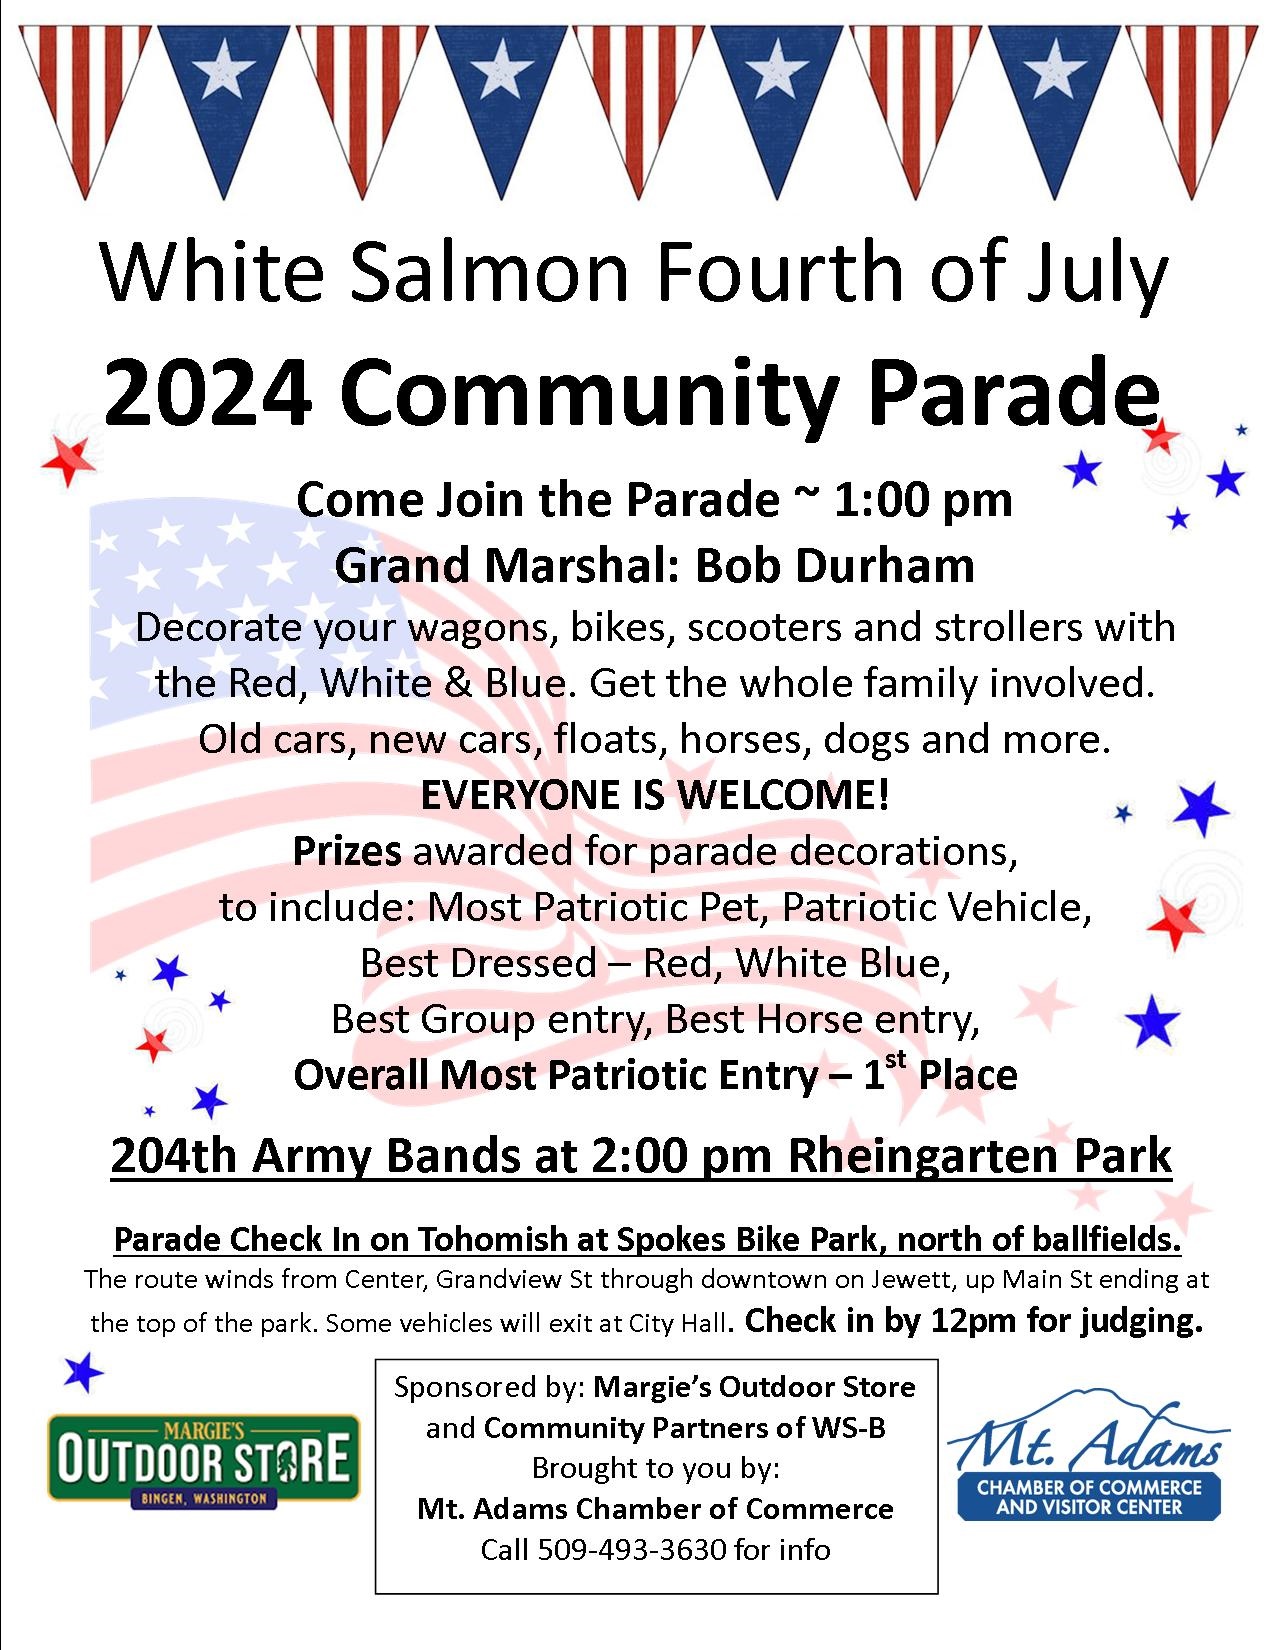 White Salmon 4th of July parade poster